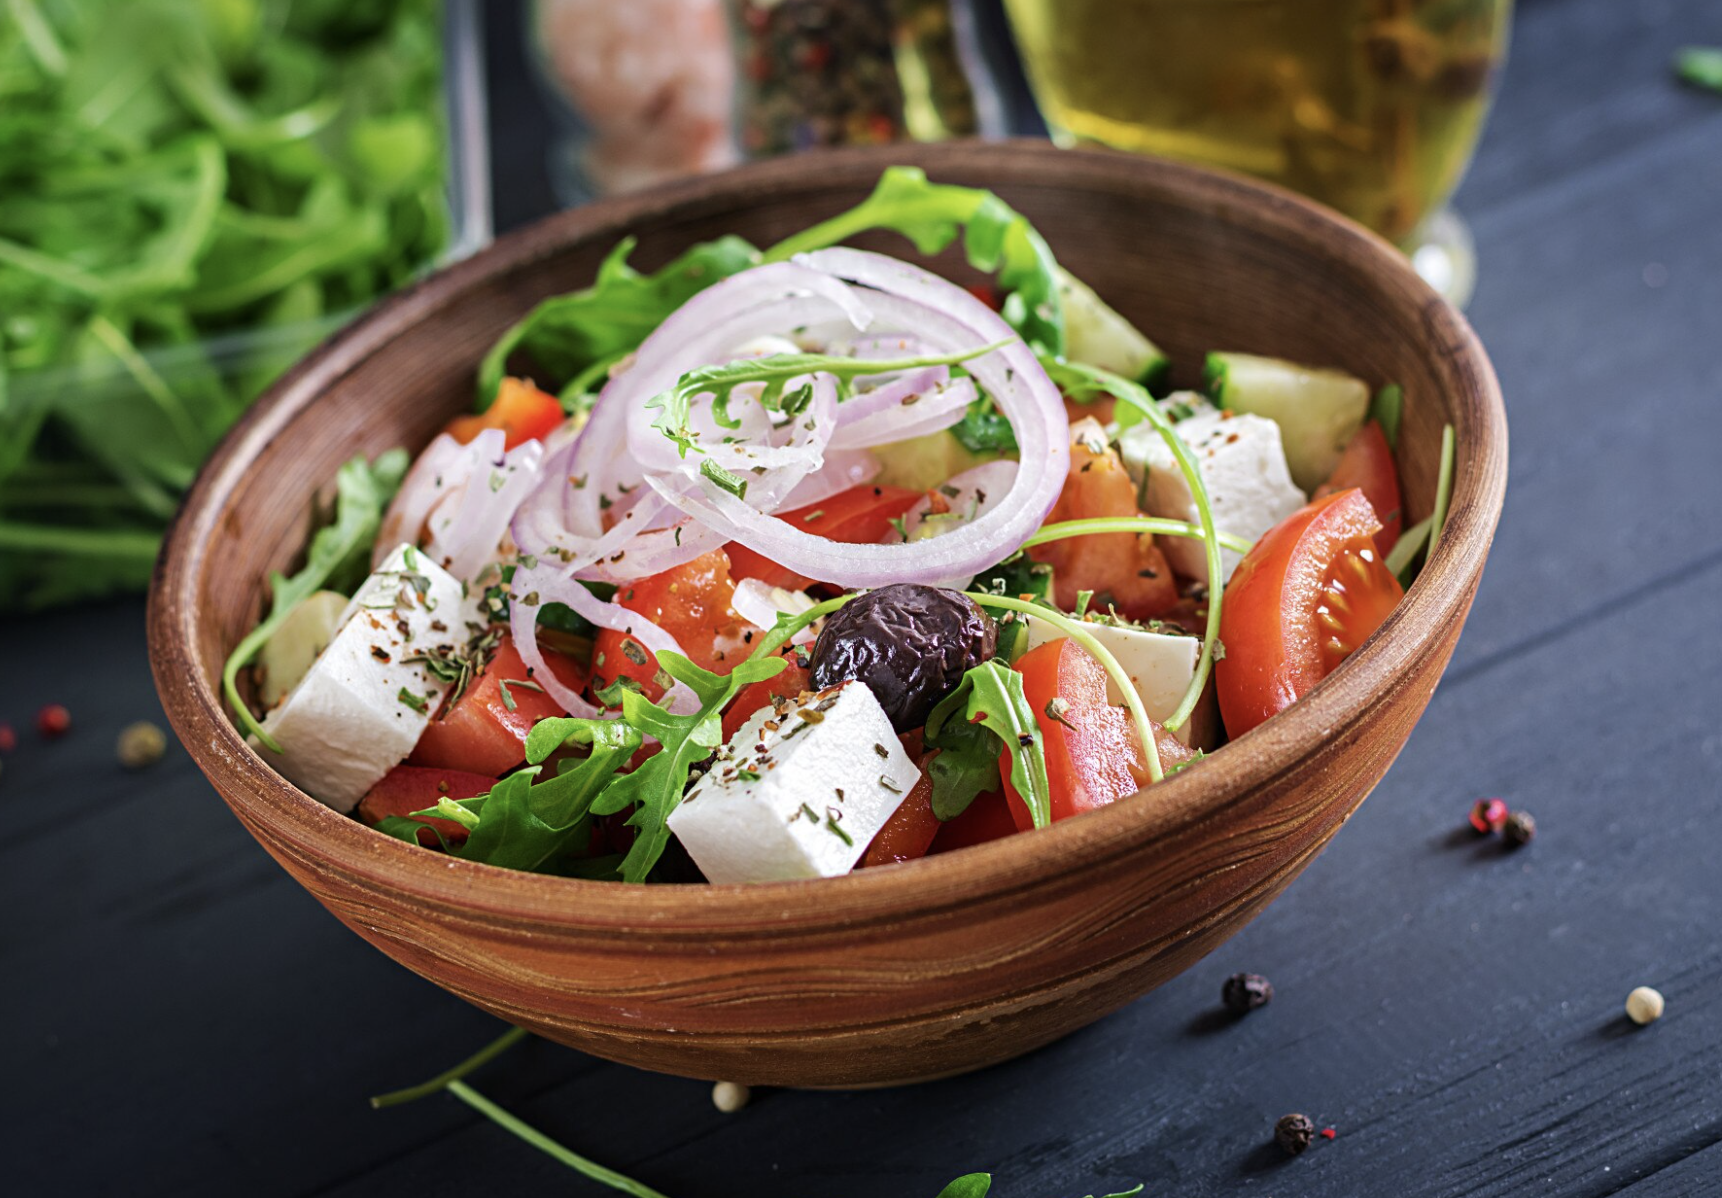 7 of the best things to eat for lunch on the Mediterranean diet